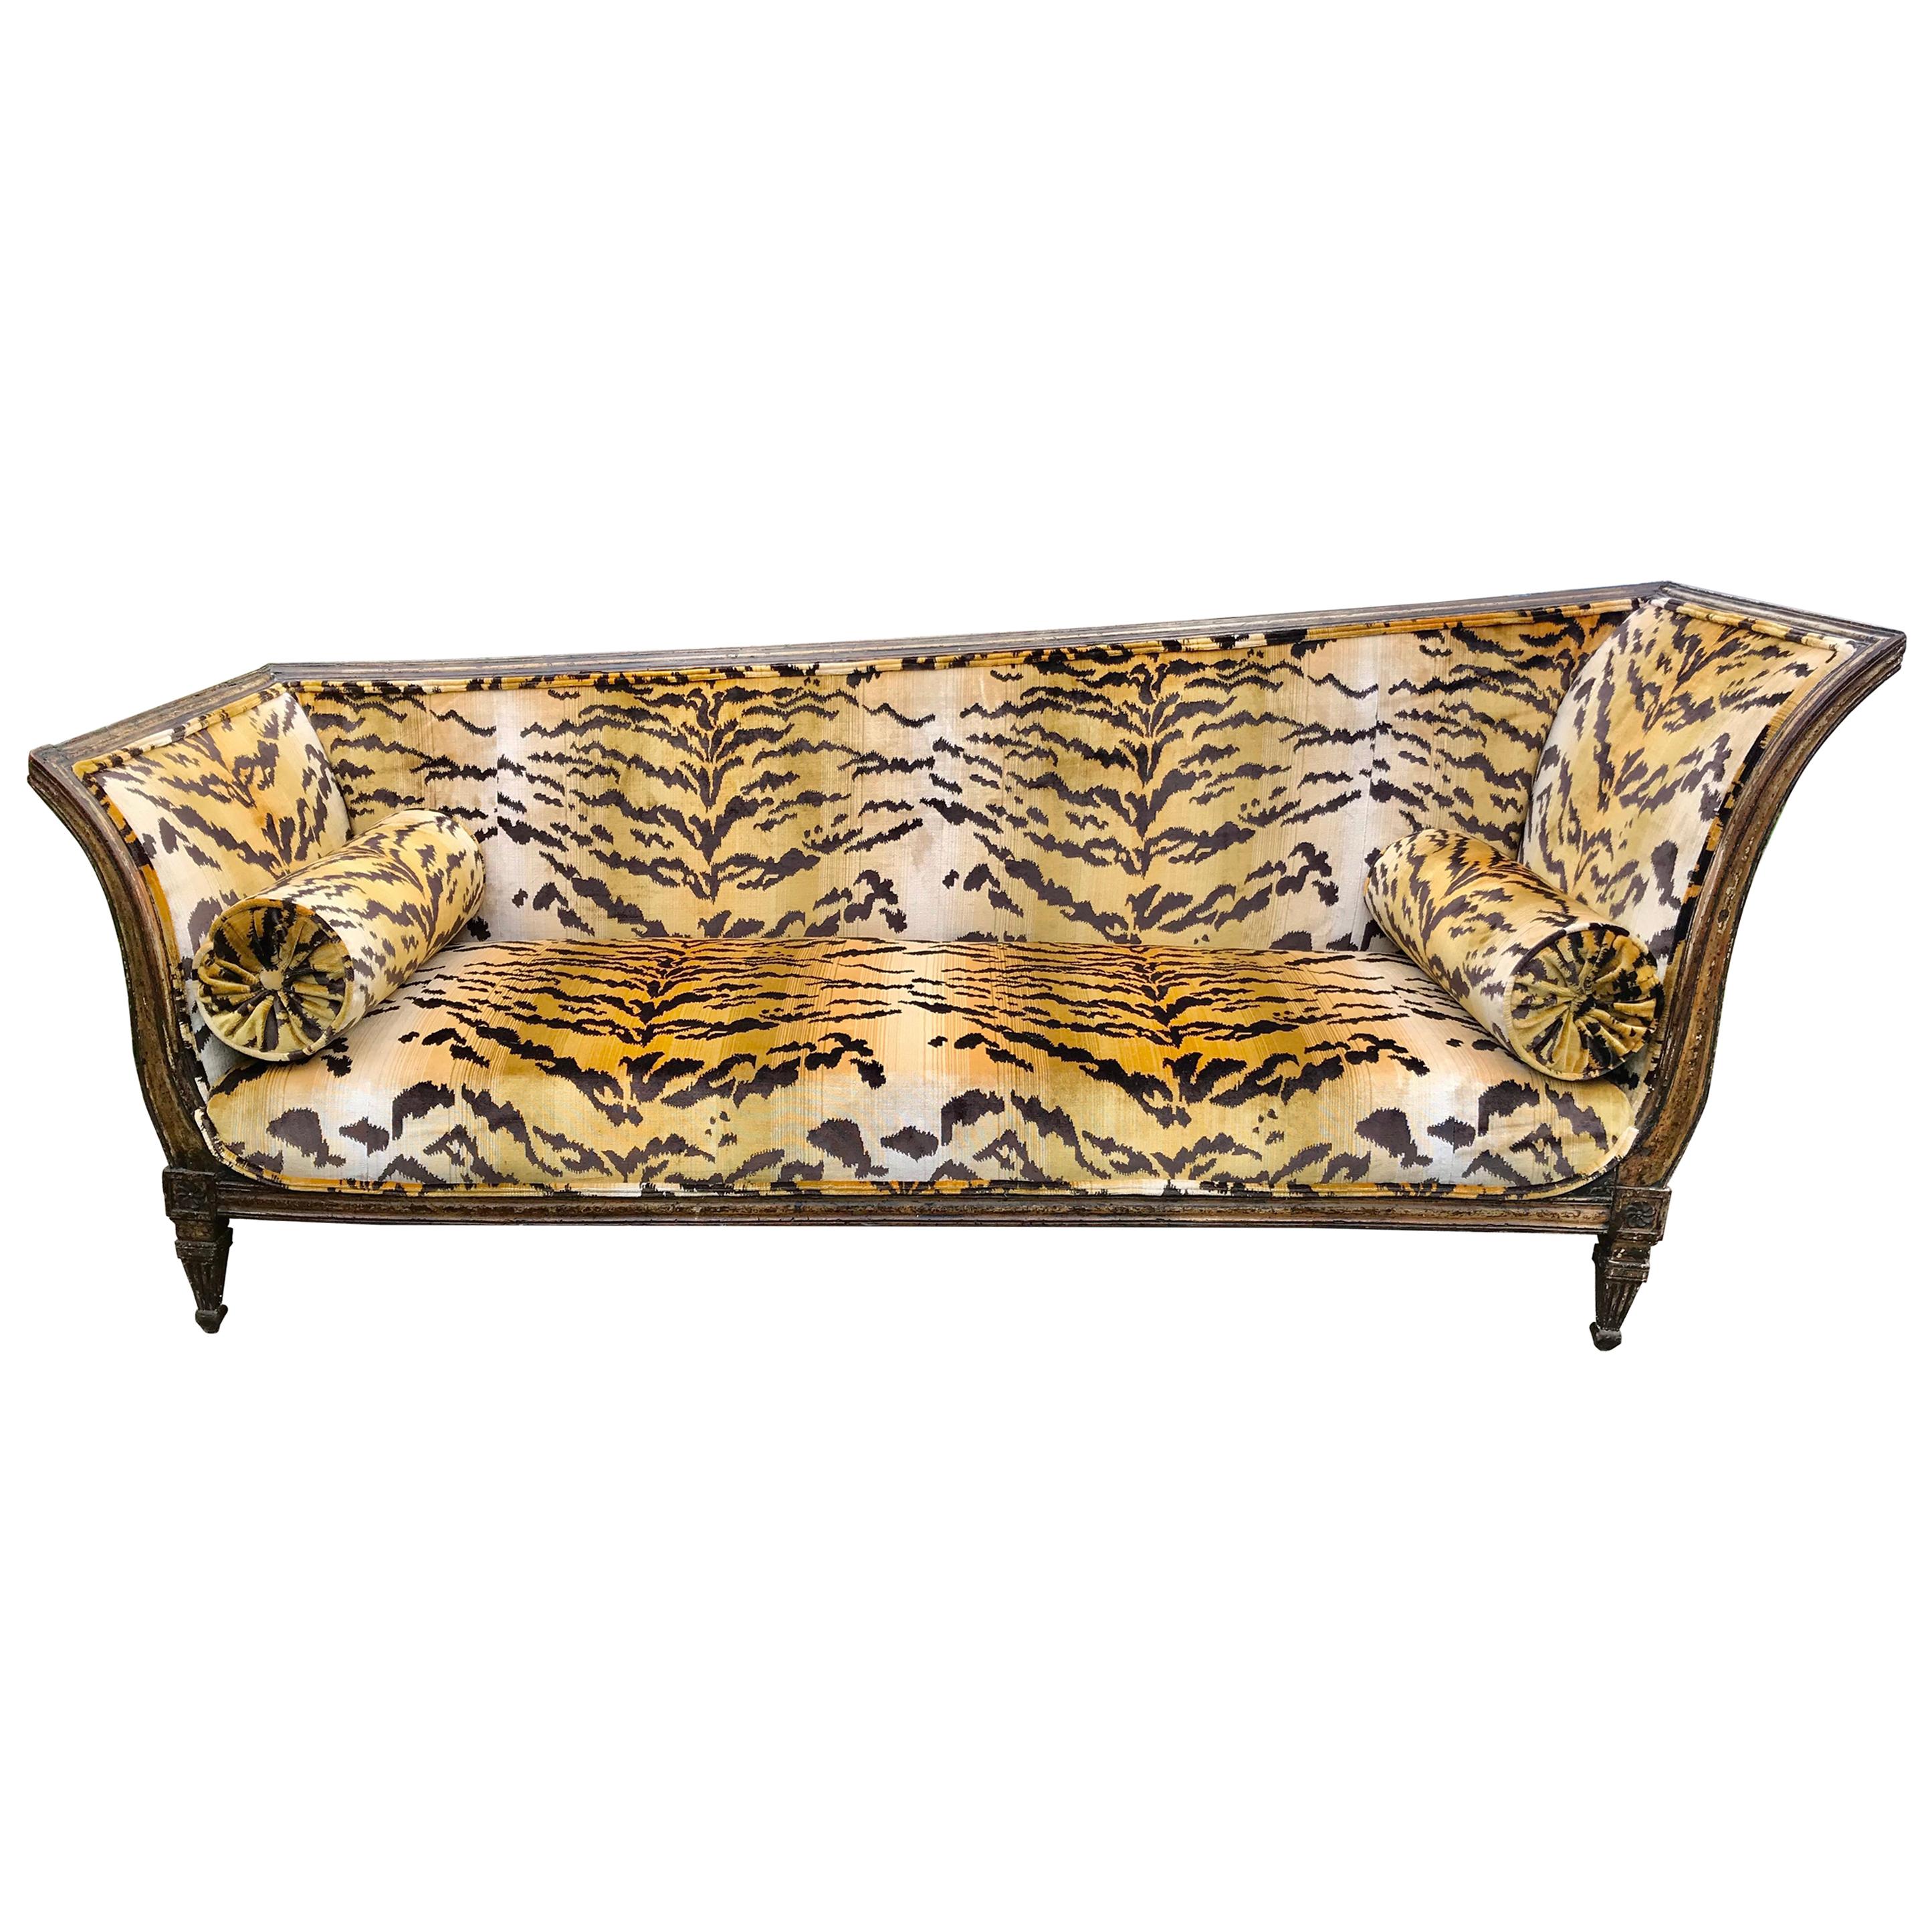 Large Italian Neoclassical Giltwood Récamier Settee in Scalamandré Tiger Velvet For Sale